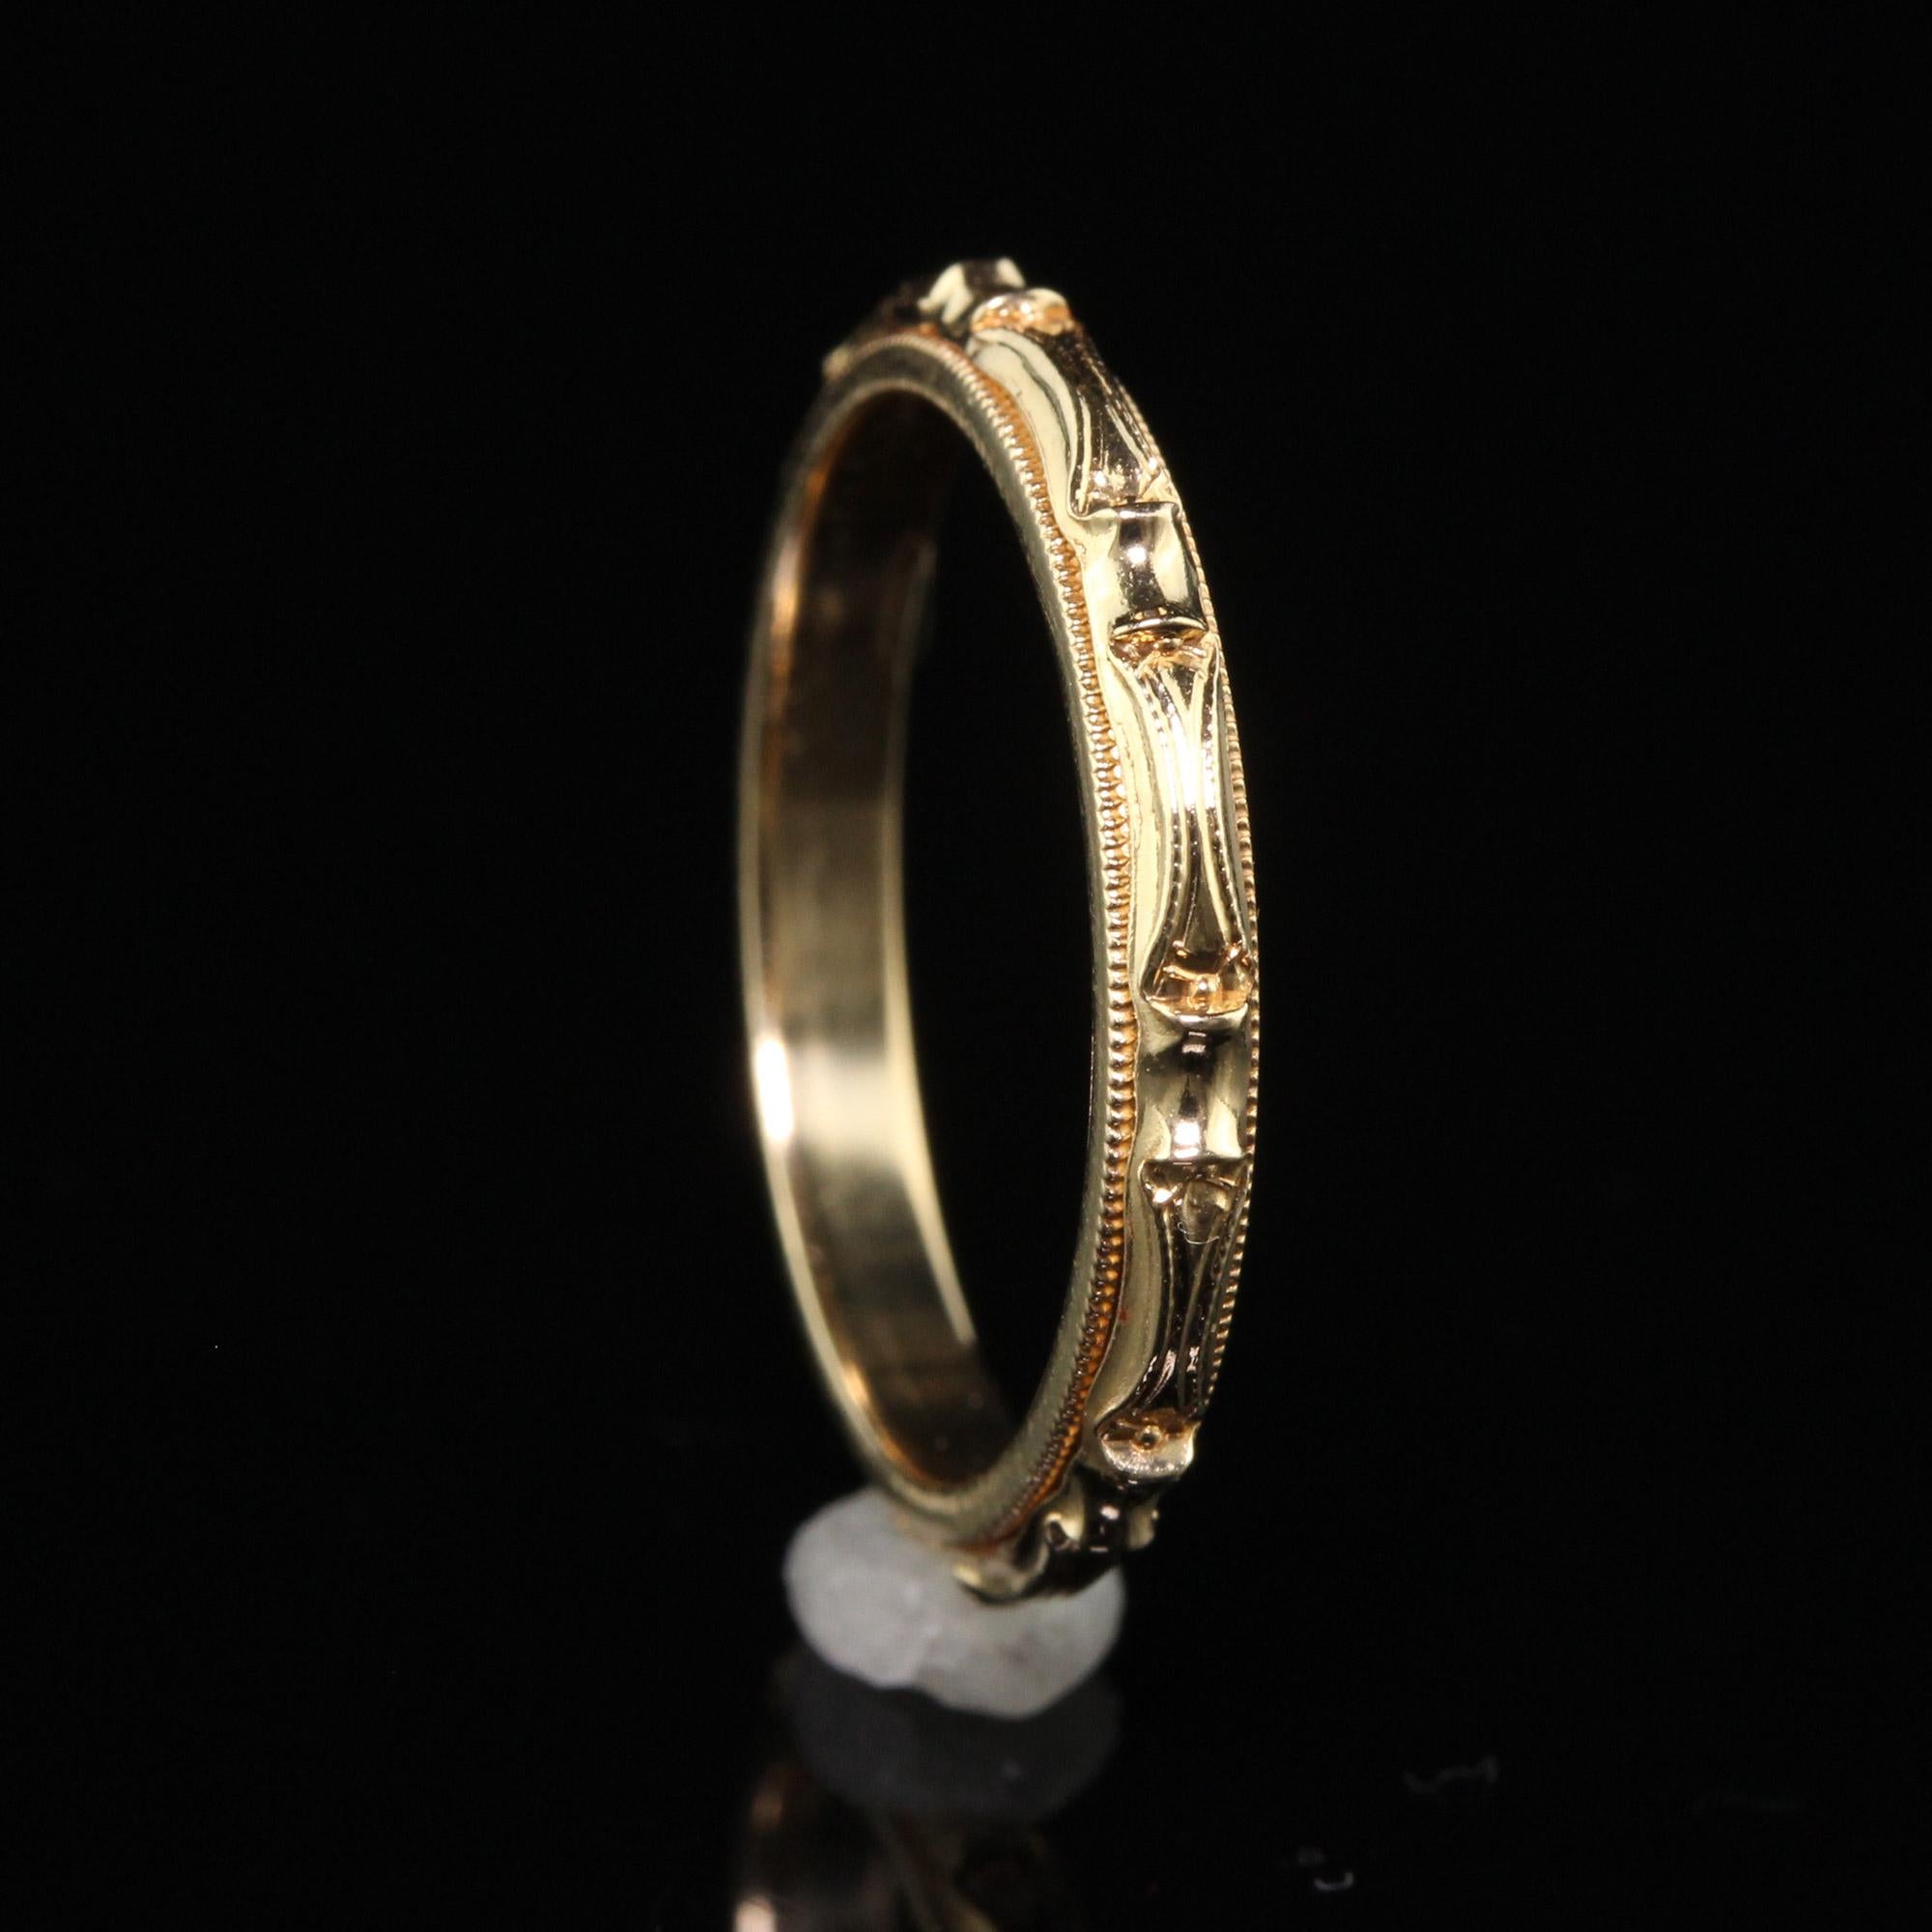 Antique Art Deco Art Carved 14K Yellow Gold Engraved Wedding Band - Size 5 2